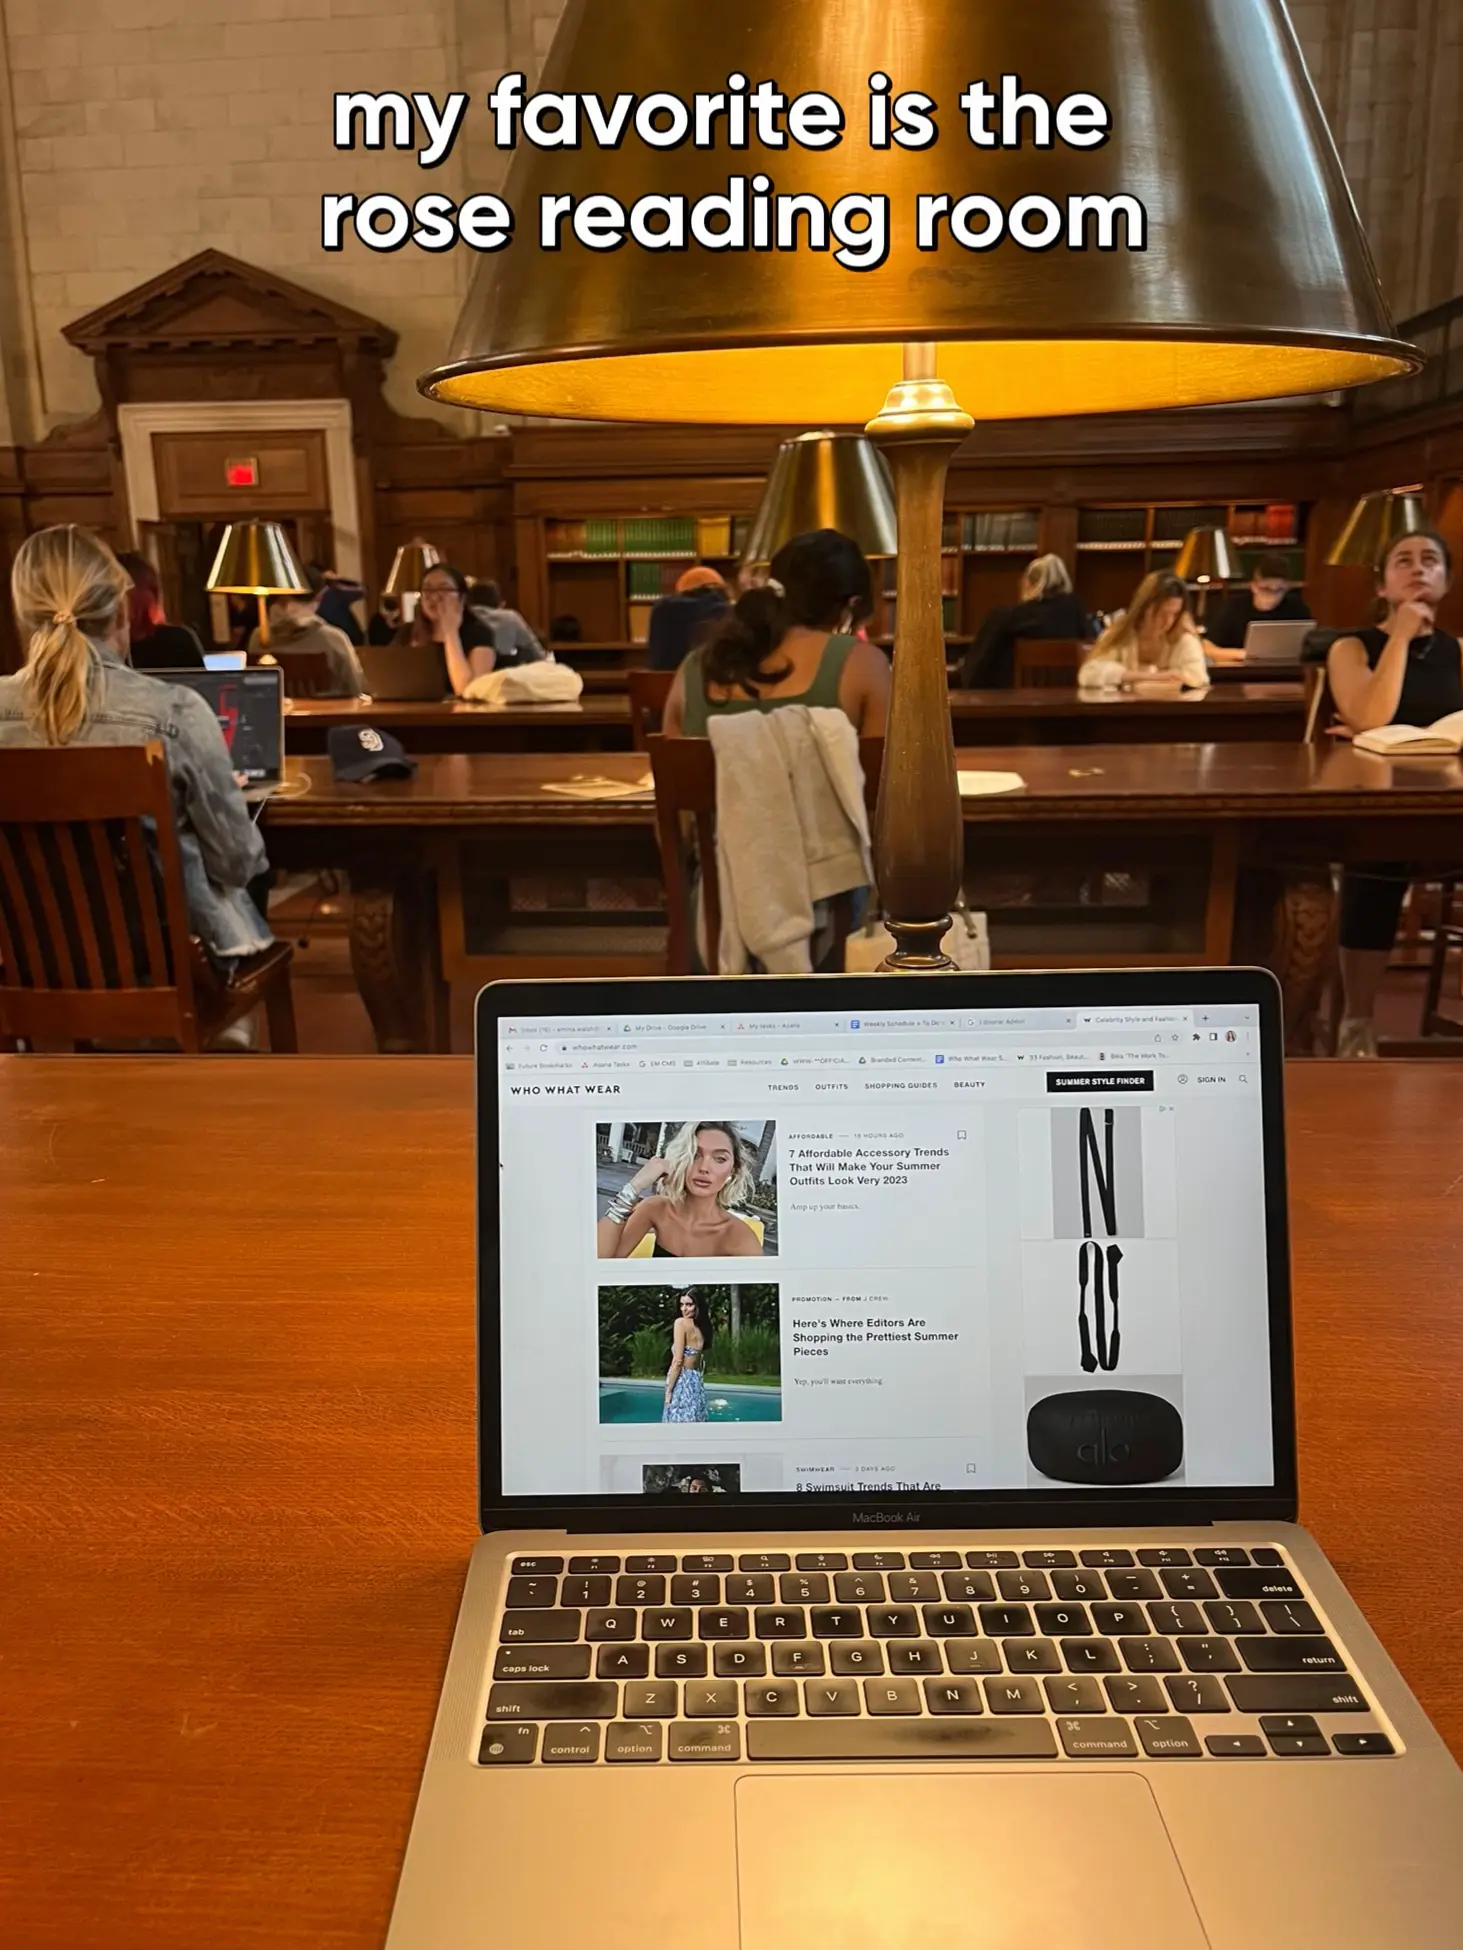  A laptop is open on a table